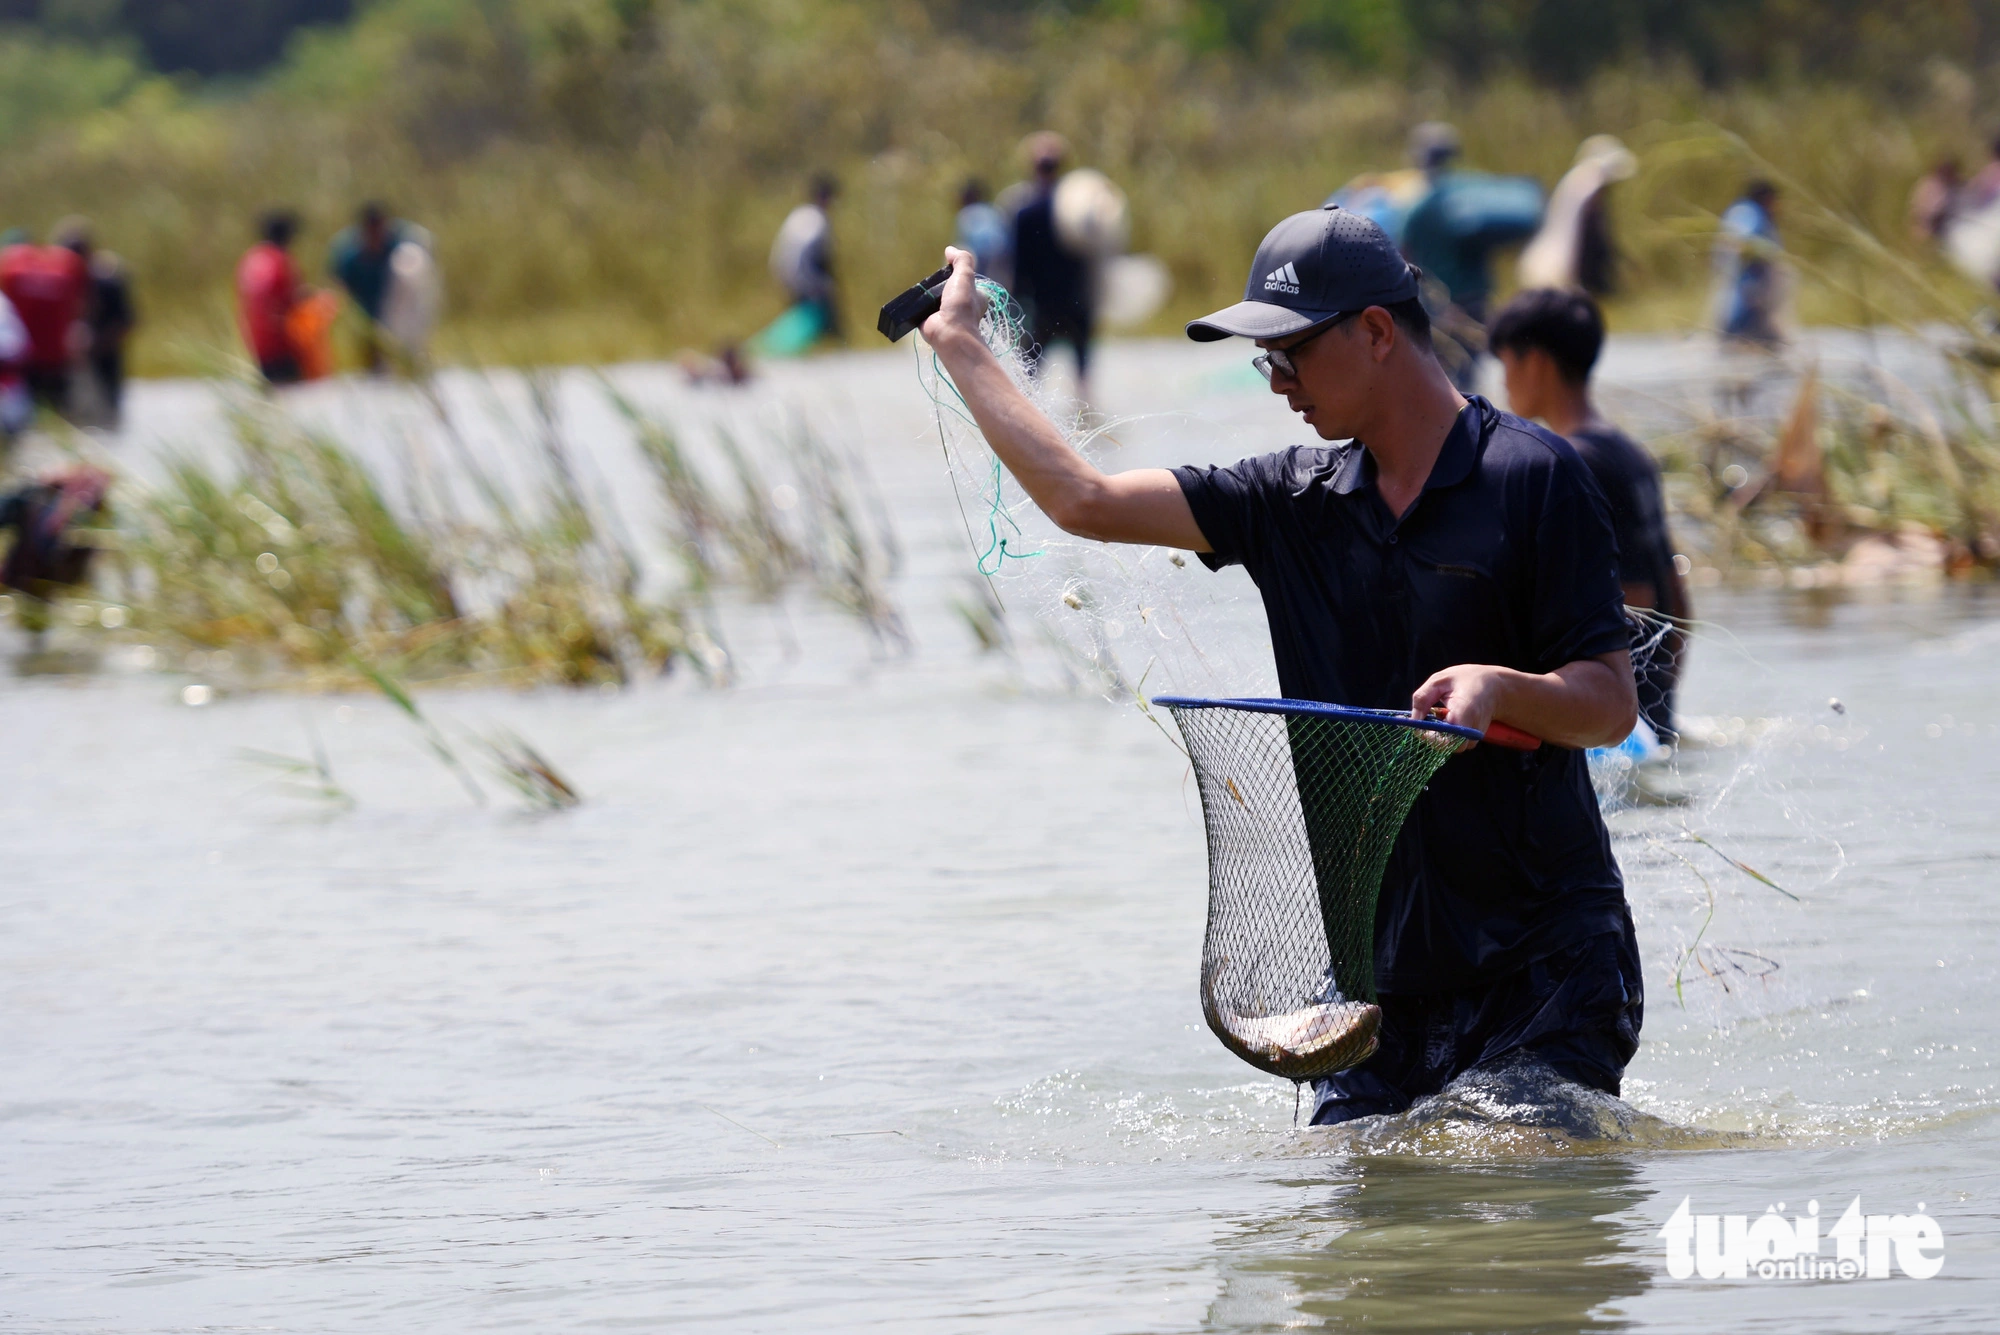 A man hailing from the adjacent province of Binh Duong uses a racket to catch fish at Tri An Hydropower Reservoir in Dong Nai Province, southern Vietnam, August 25, 2023. Photo: A Loc / Tuoi Tre